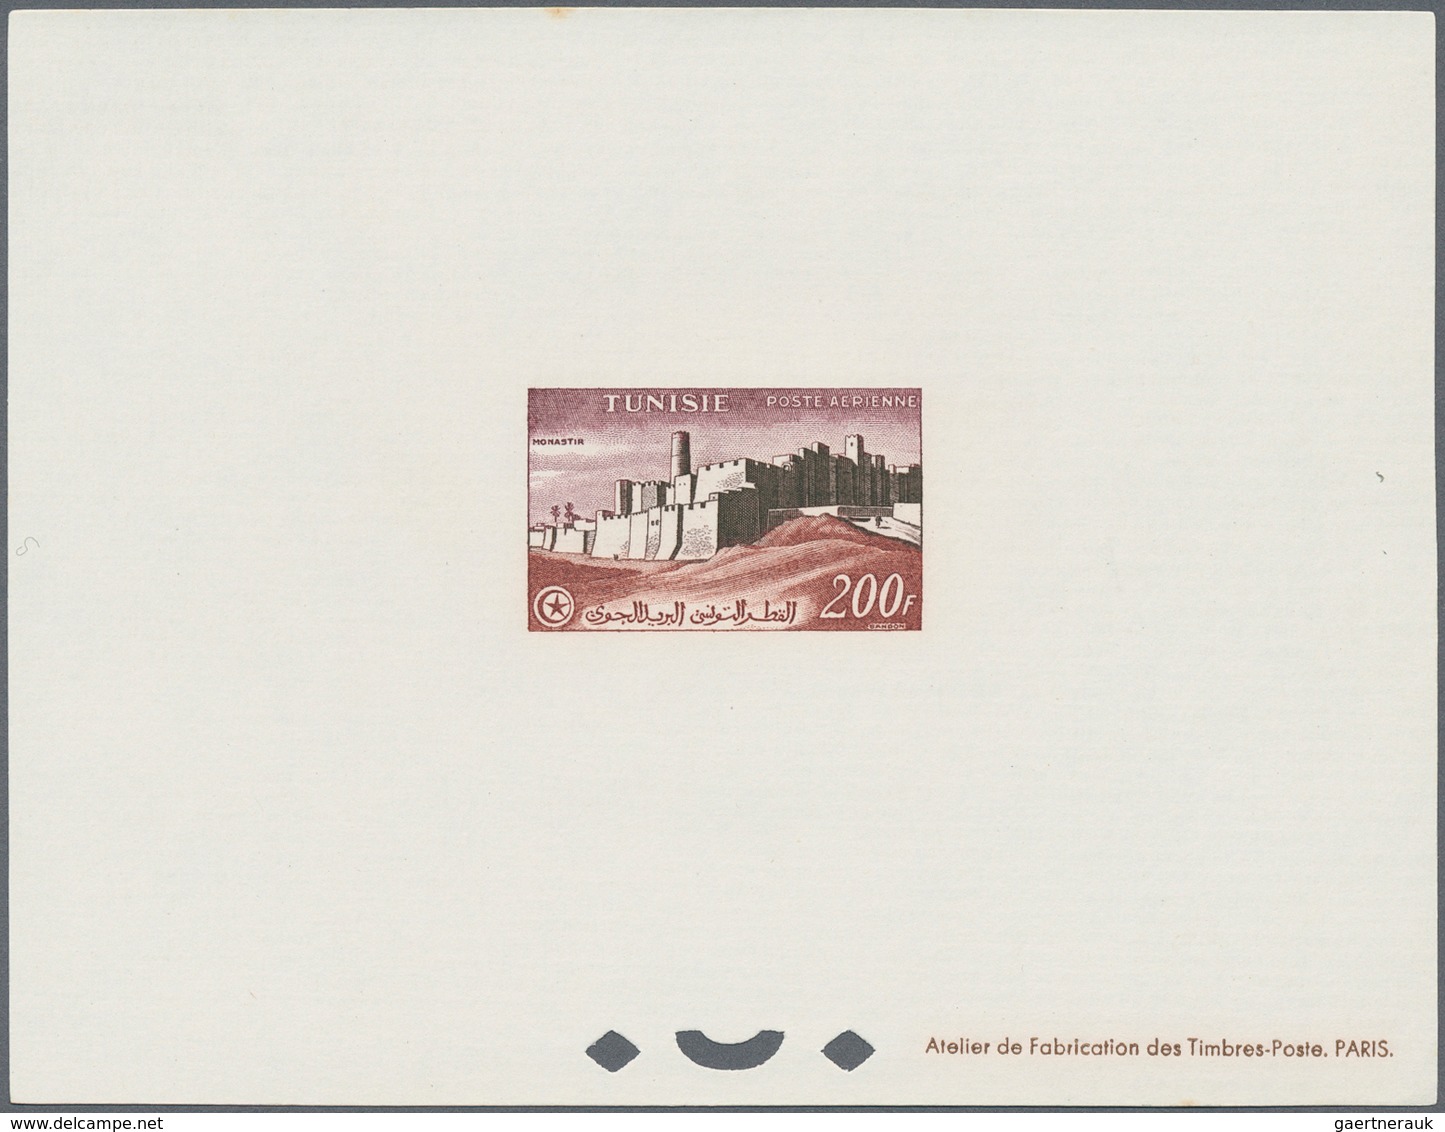 Tunesien: 1890-1975, 132 Epreuve de Luxe including sunk die proofs, two very scarce first issue proo